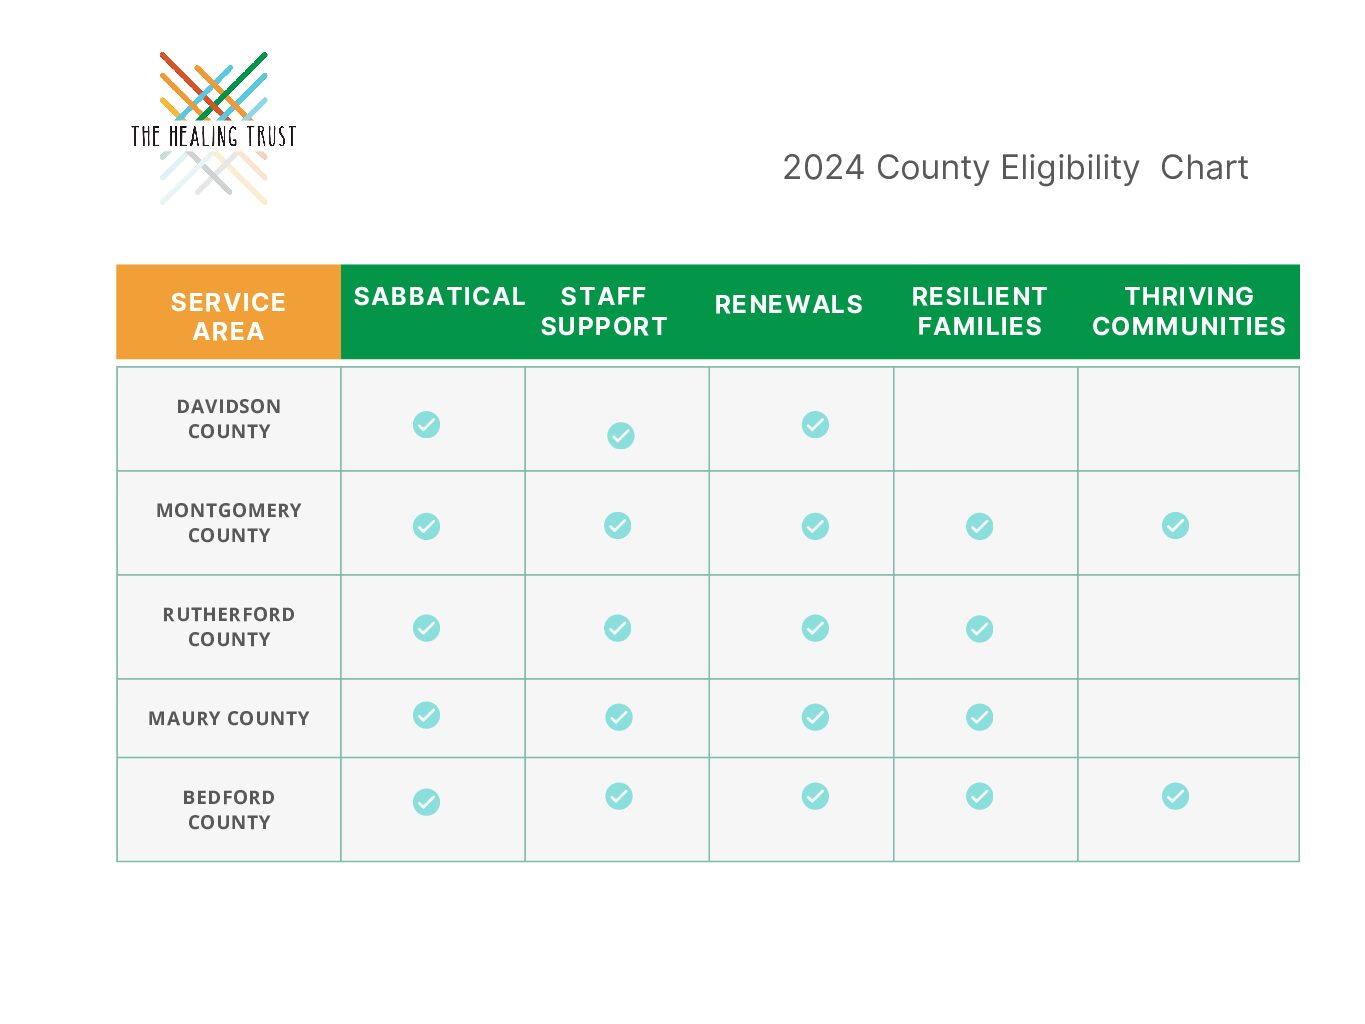 Updated 2024 County Eligibility Chart